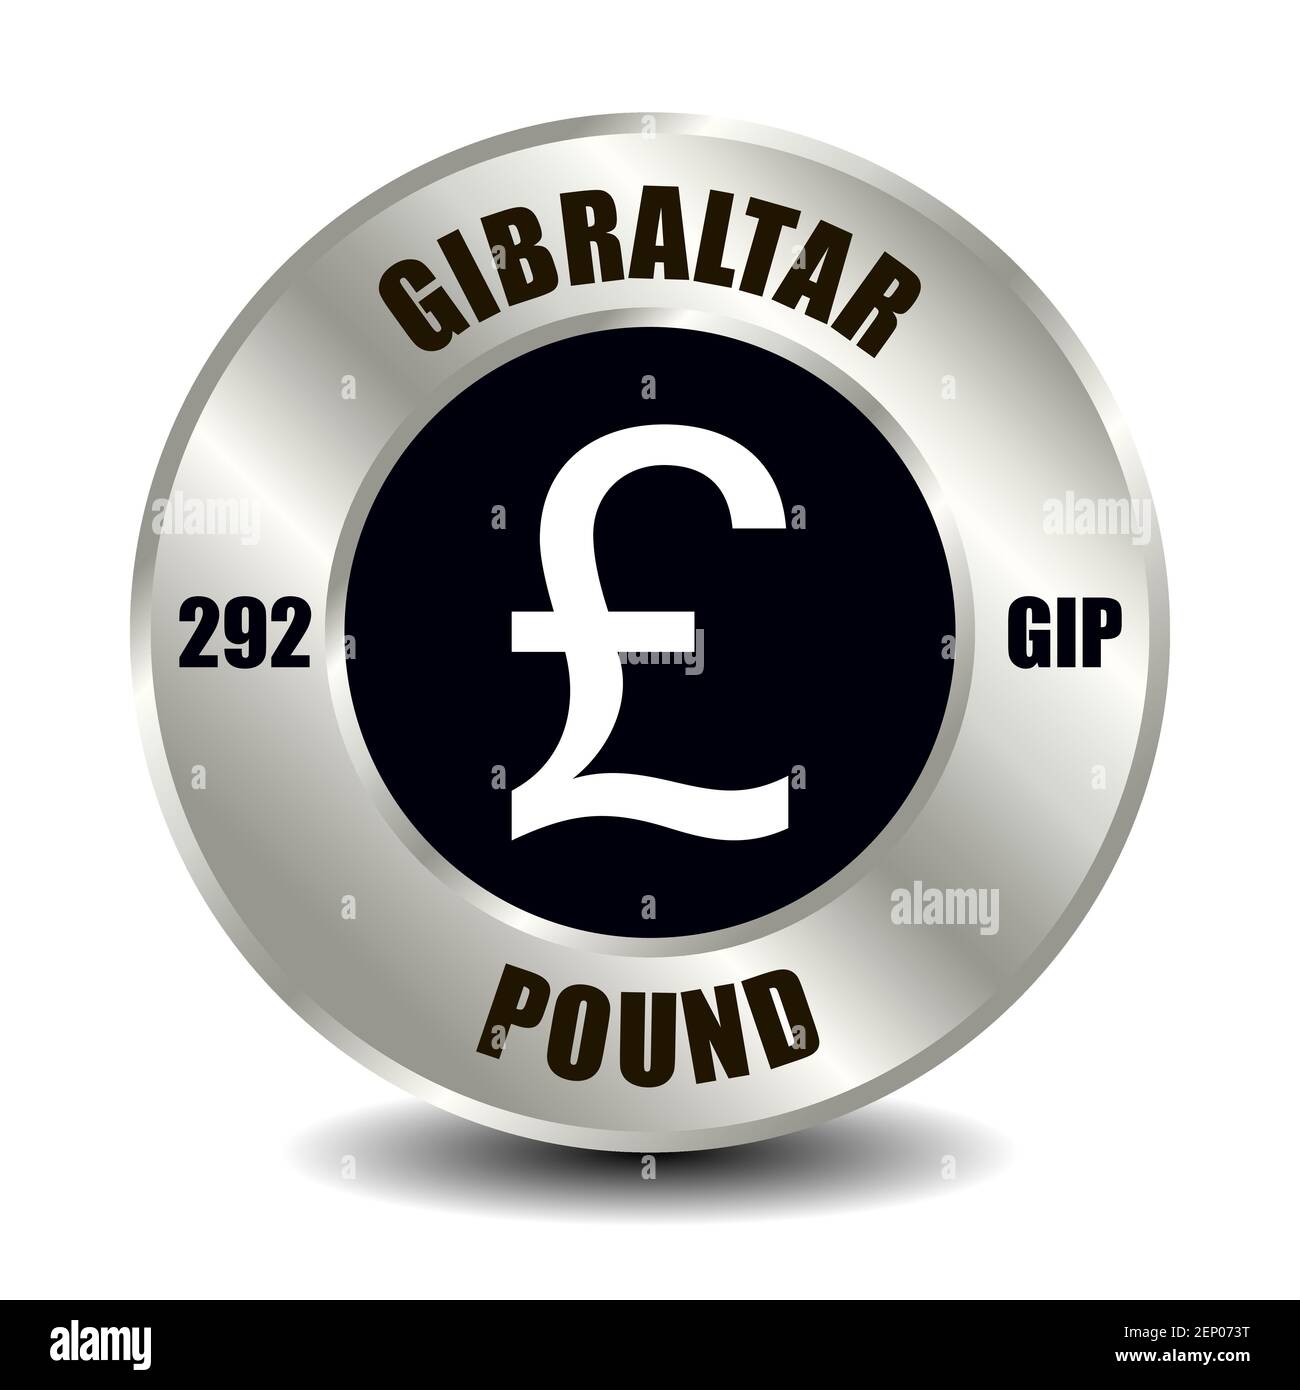 Gibraltar money icon isolated on round silver coin. Vector sign of currency symbol with international ISO code and abbreviation Stock Vector